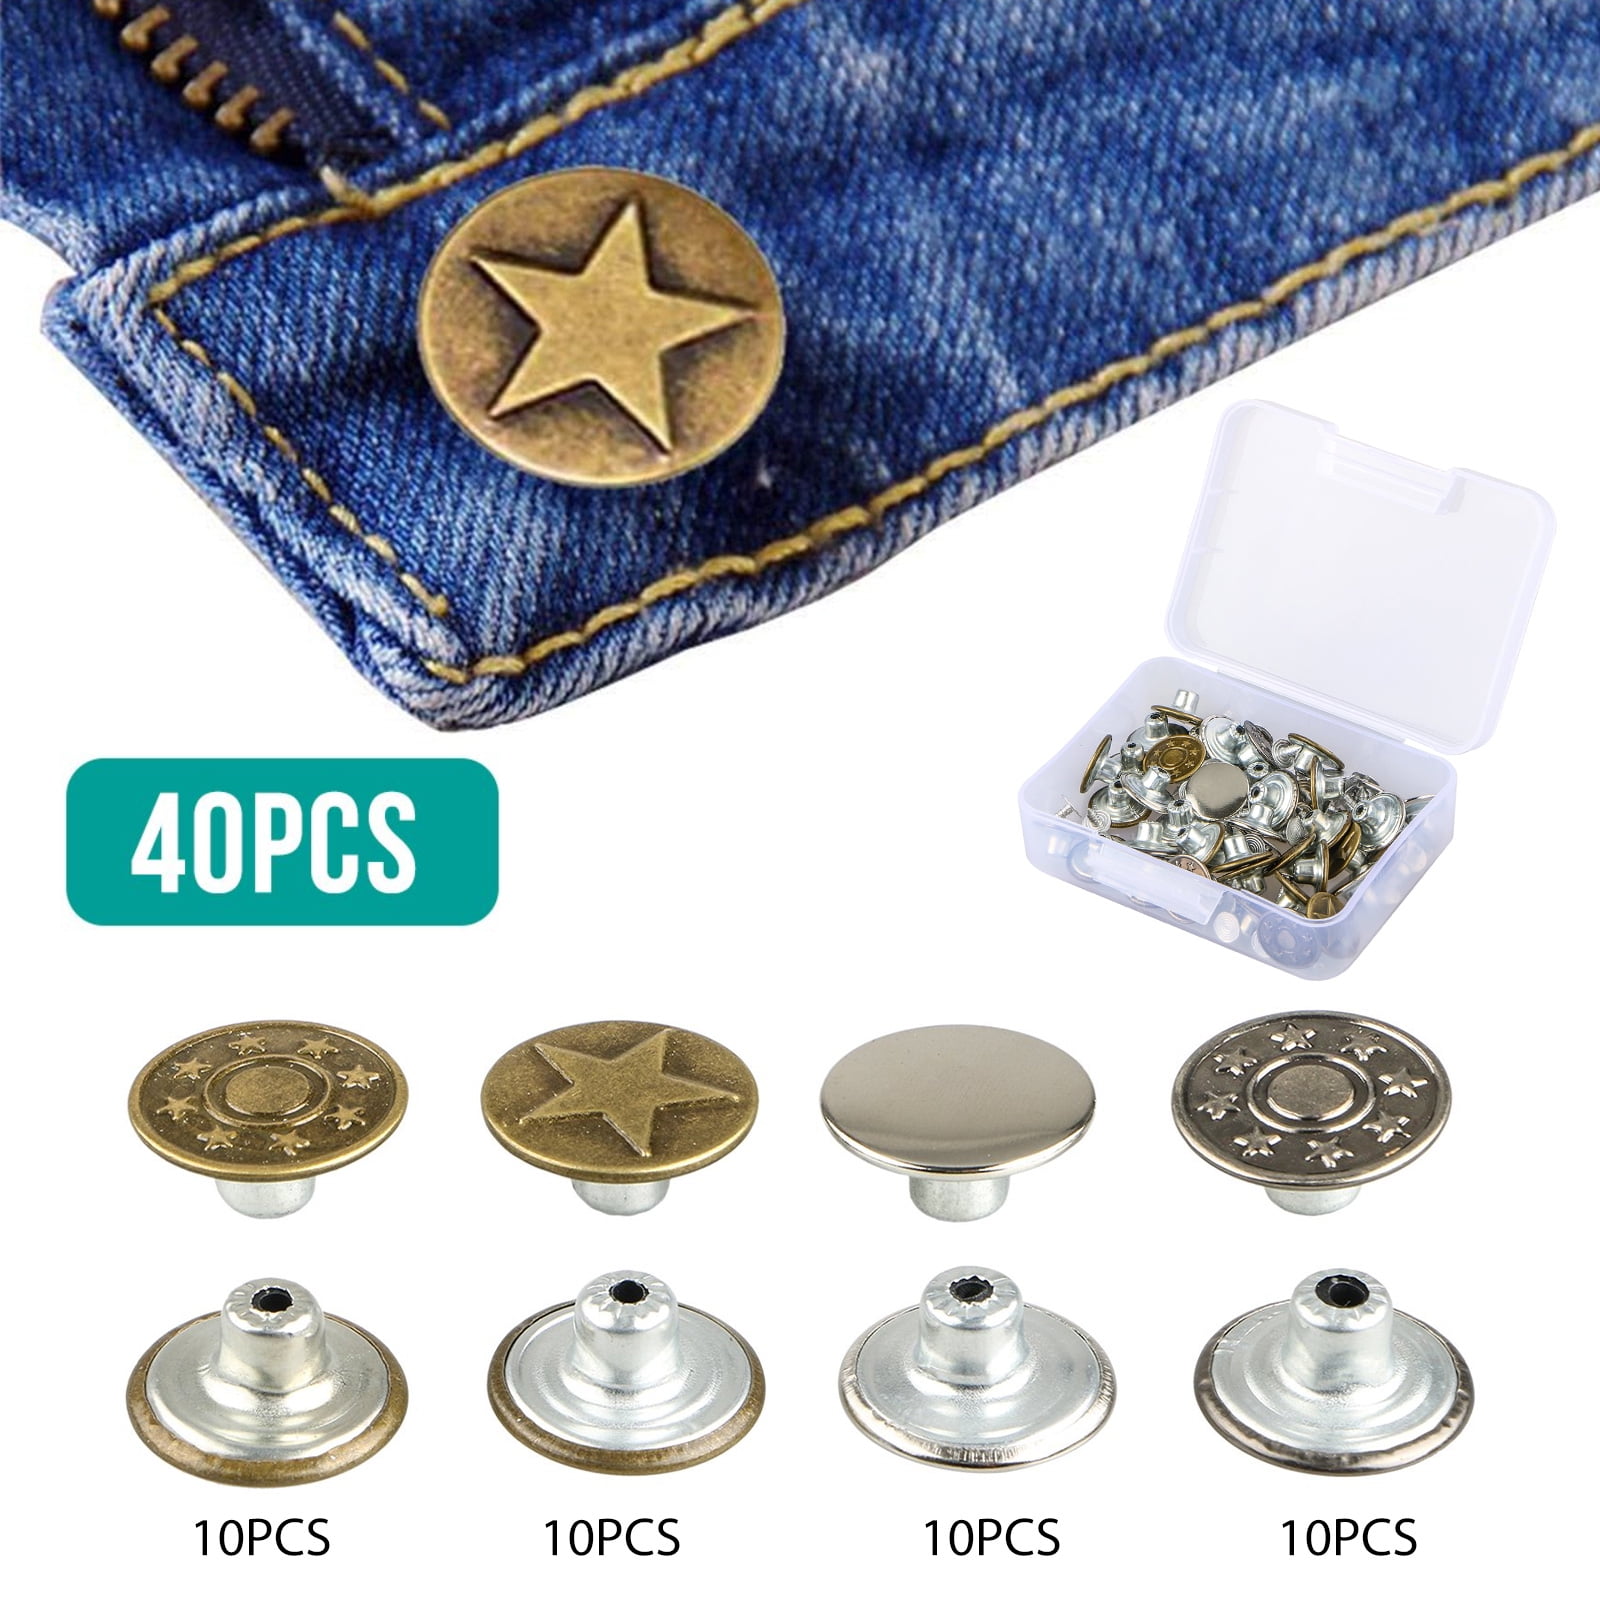 Jean Button Pins 4 PCS Button Pins for Jeans Pants Button Pins Instant Buttons Jean Button for Pants Fashion Jeans Swing Crafts DIY Easy to Use and No Tools Require. 